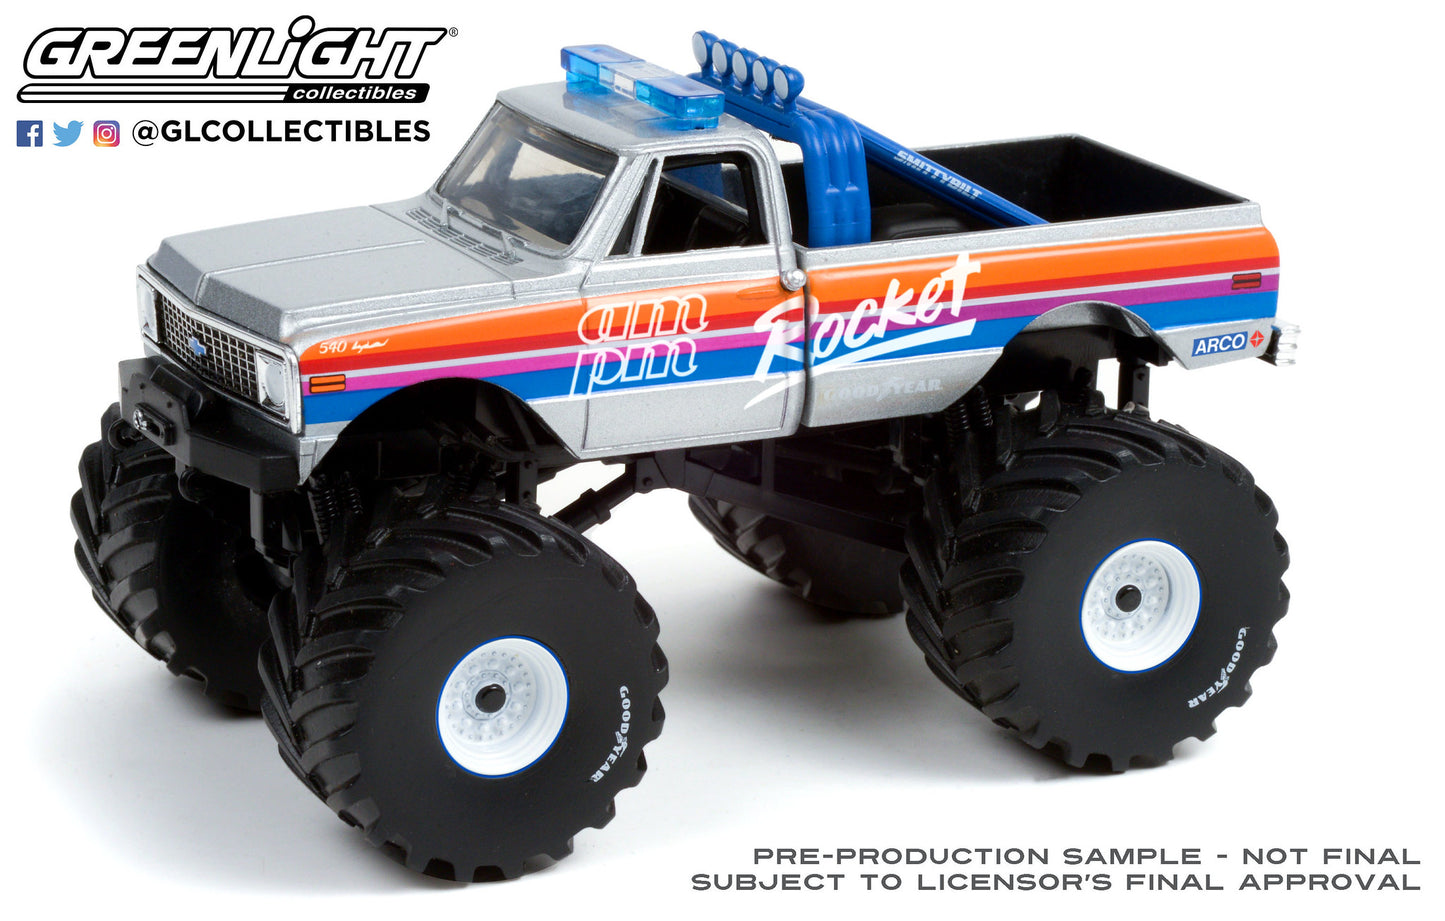 1:43 Kings of Crunch - Rocket - 1972 Chevrolet K-10 Monster Truck (with 66-Inch Tires)